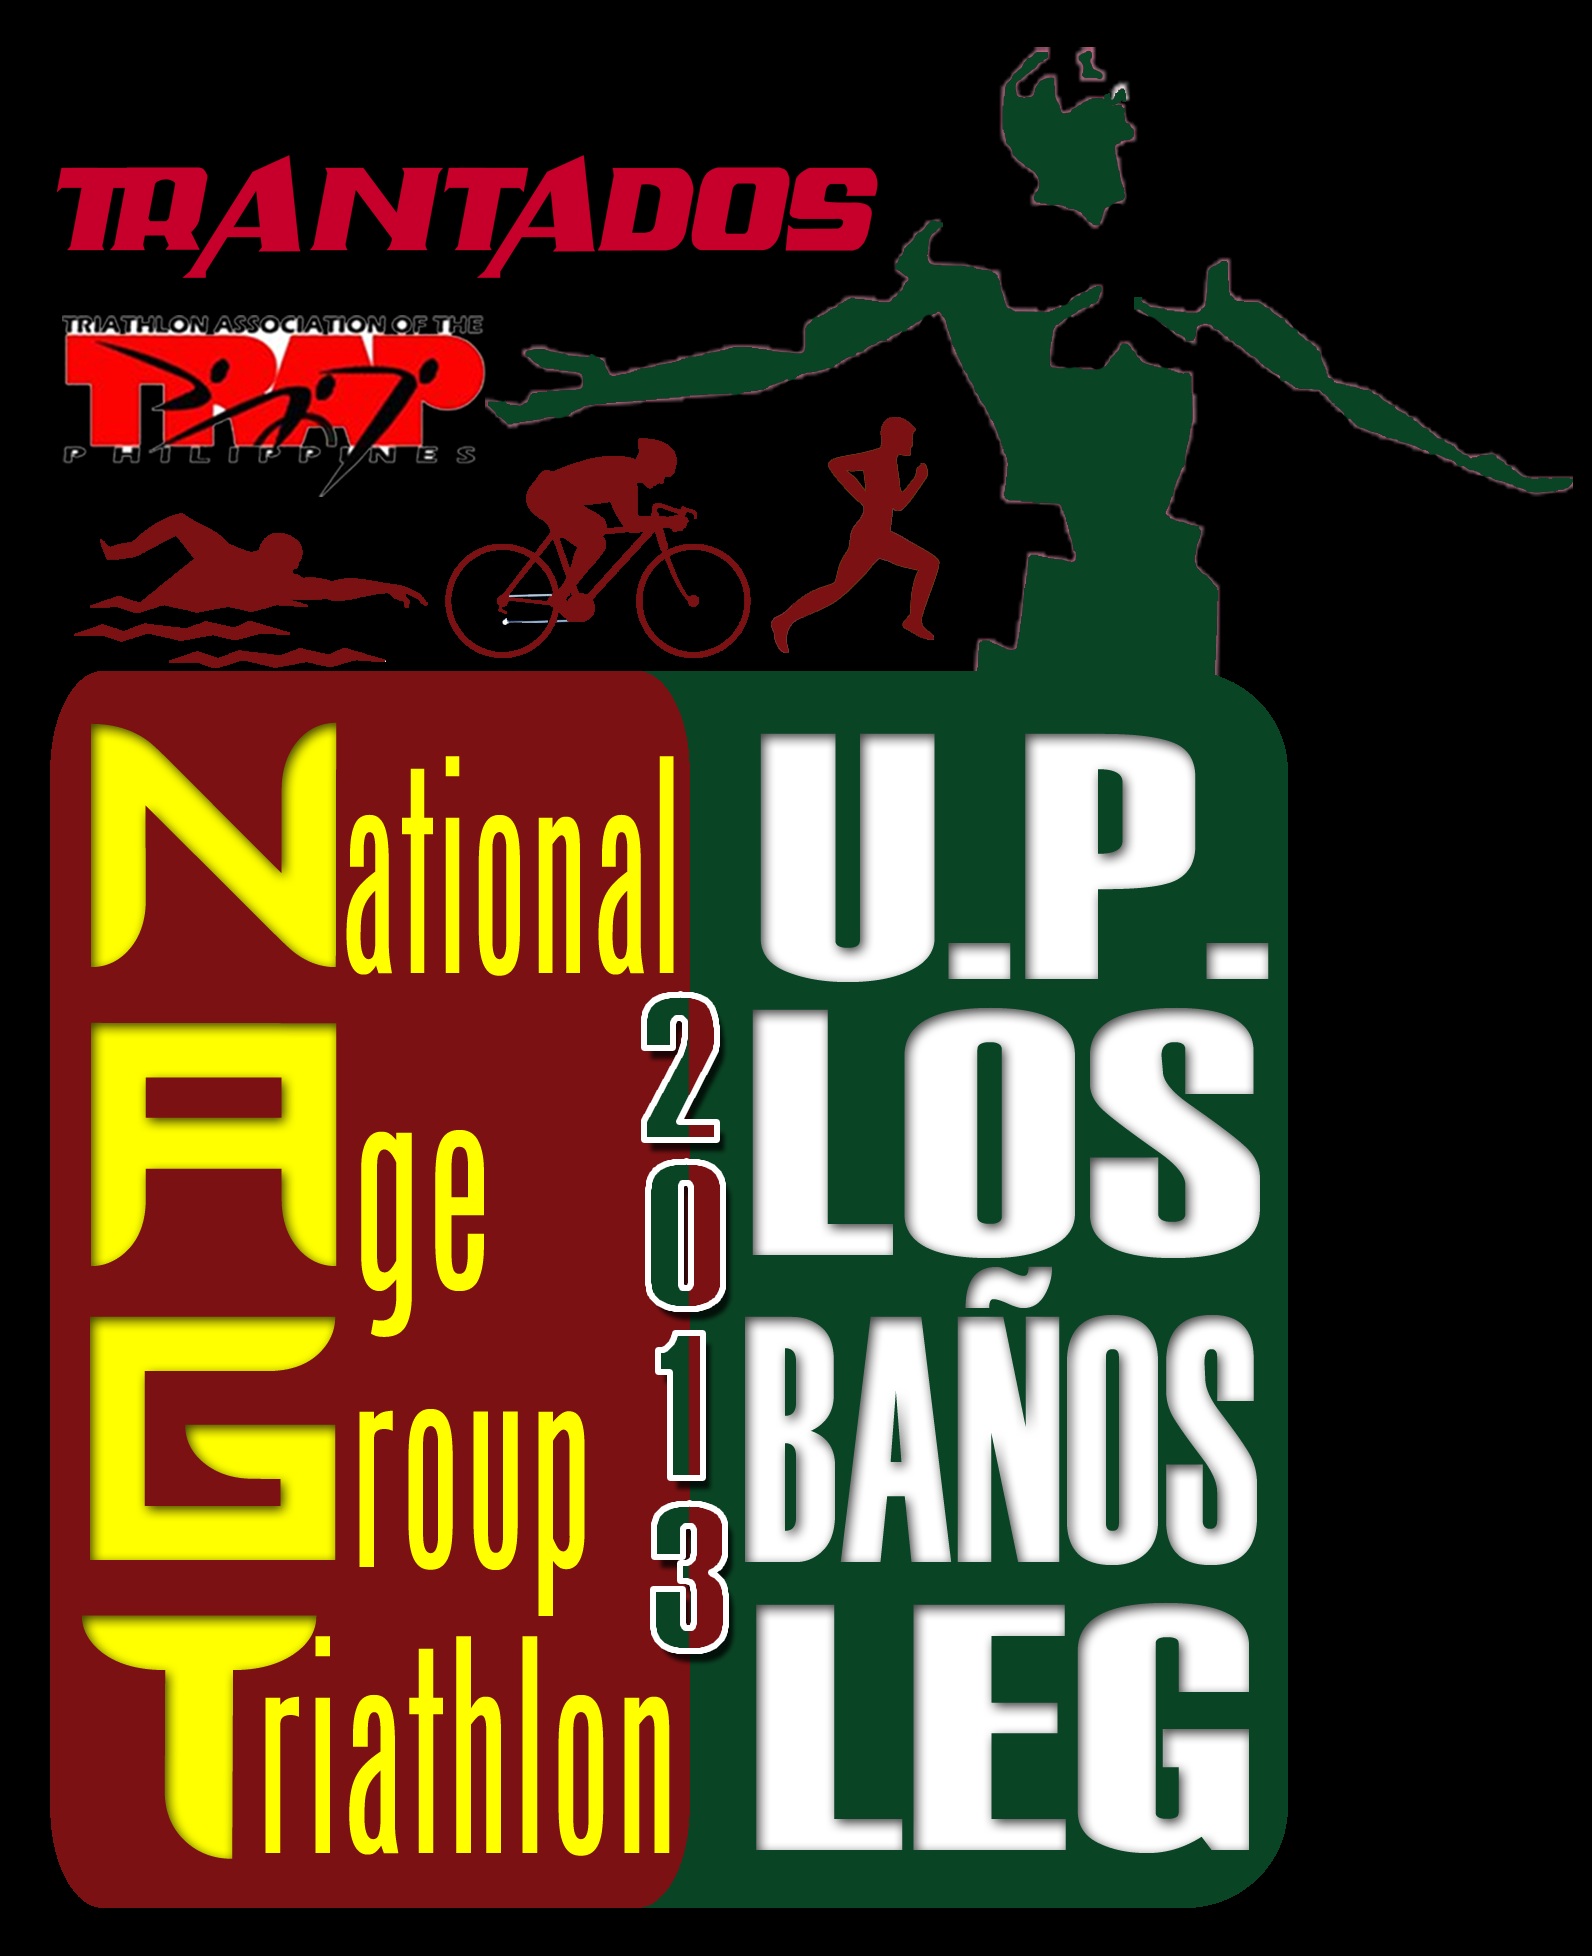 5th-national-age-group-triathlon-2013-poster